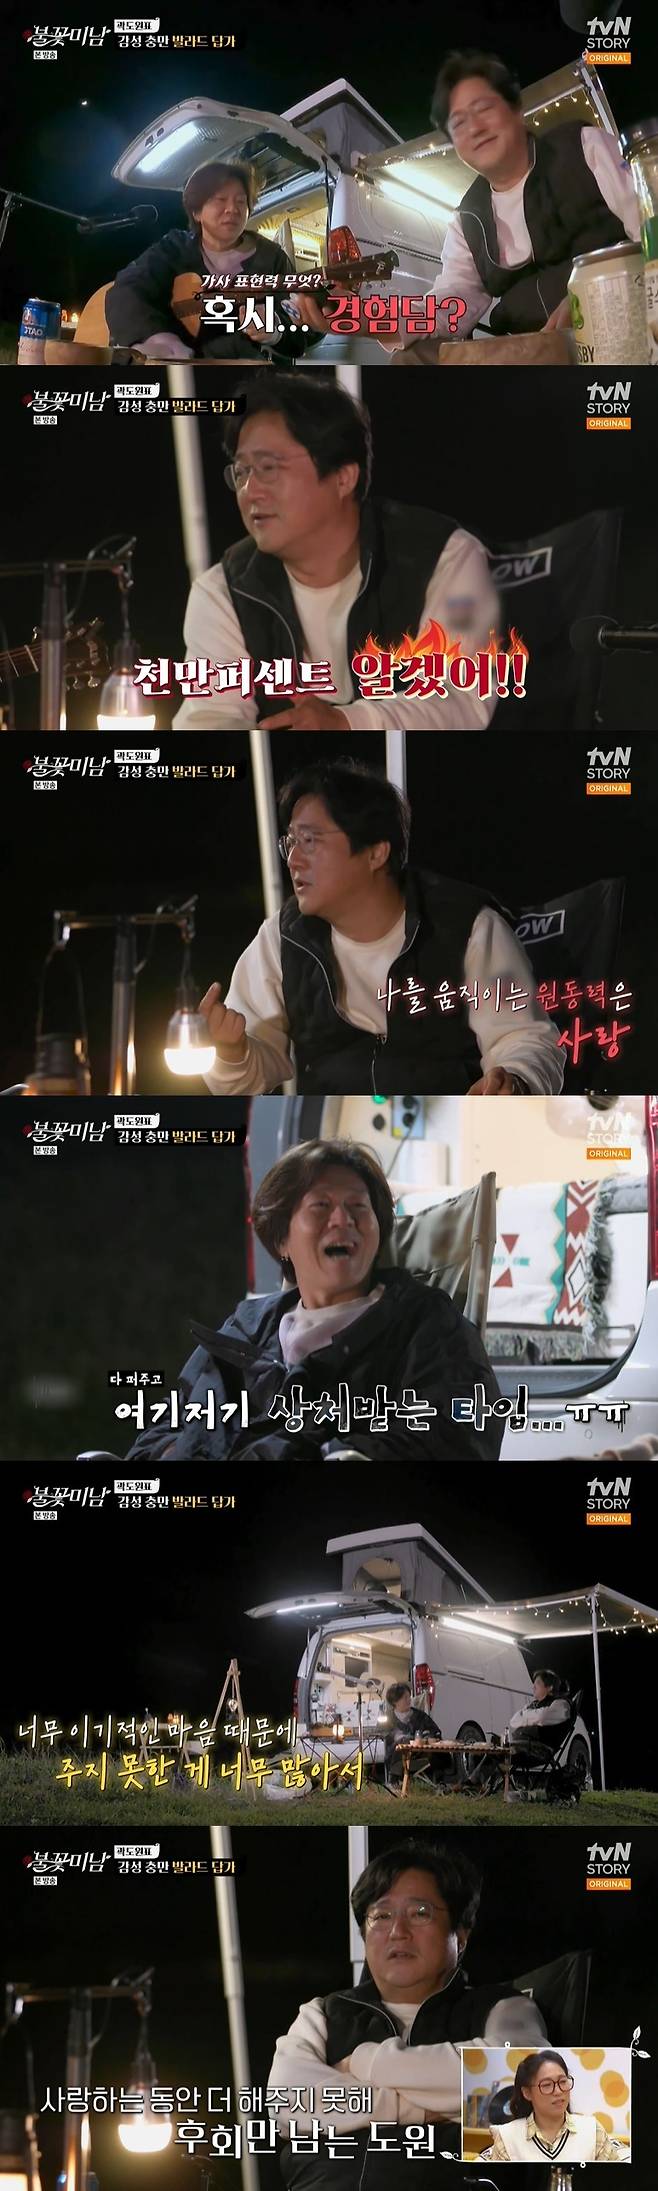 Kwak Do-won has told Yoon Do Hyun his wounds from love.On TVN STORY Fireworks Beautiful broadcast on June 24, Yoon Do Hyun and Kwak Do-won enjoyed camping together and talked deeply.Kwak Do-won, who came to play as a camping car of Yoon Do Hyun, asked Yoon Do Hyun to sing for his birthday, and Yoon Do Hyun called In front of the autumn post office and Forget.Yoon Do Hyun also proposed a song to Kwak Do-won, who was so excited about the song, and Kwak Do-won filled with Feeling and enthusiastically sang Jias Have a drink.I think youre the main character of this song, said Yoon Do Hyun, who said, I know ten million percent of his heart. He had similar experiences.Its like the word love that makes me wriggle, said thoughtful Kwak Do-won.When Yoon Do Hyun asked, When you love, you pour all the Feeling and you are passionately one. Kwak Do-won said, You are right, you are right, you are right, you are right.So I can not join Feeling in every song lyrics, said Yoon Do Hyun. I want to miss whoever it is, and I do not think ITZY is the time.Is it painful or painful, but I am happy. 